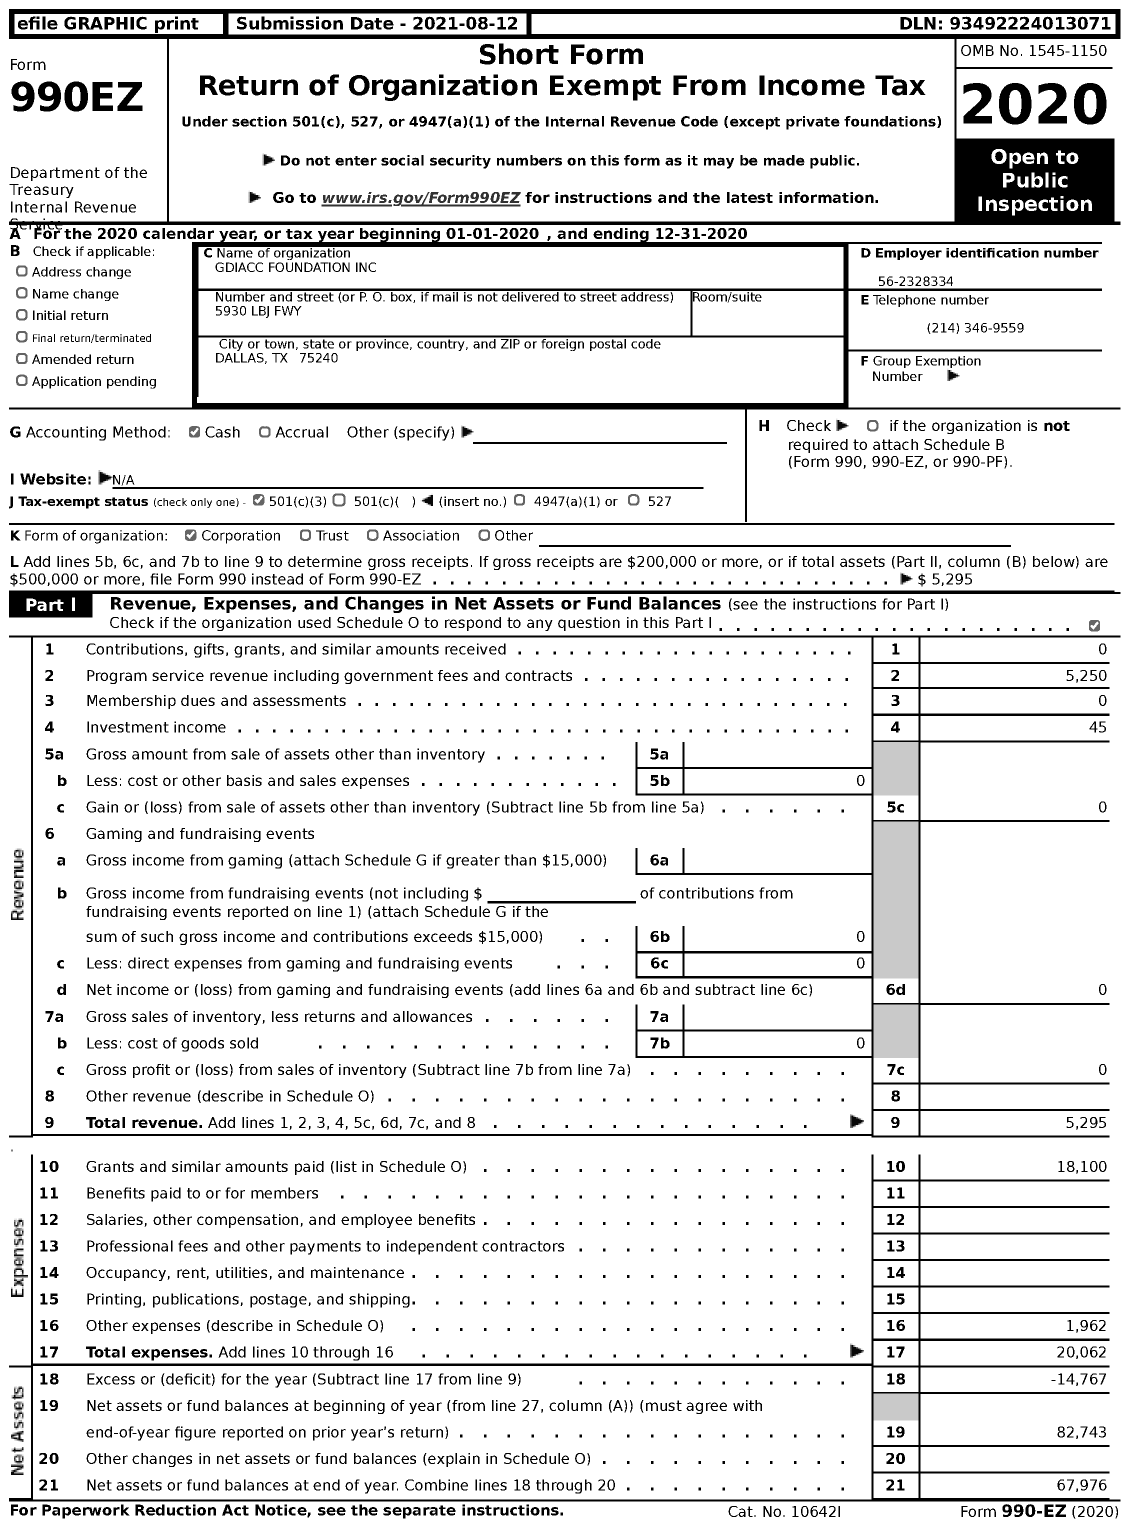 Image of first page of 2020 Form 990EZ for Gdiacc Foundation